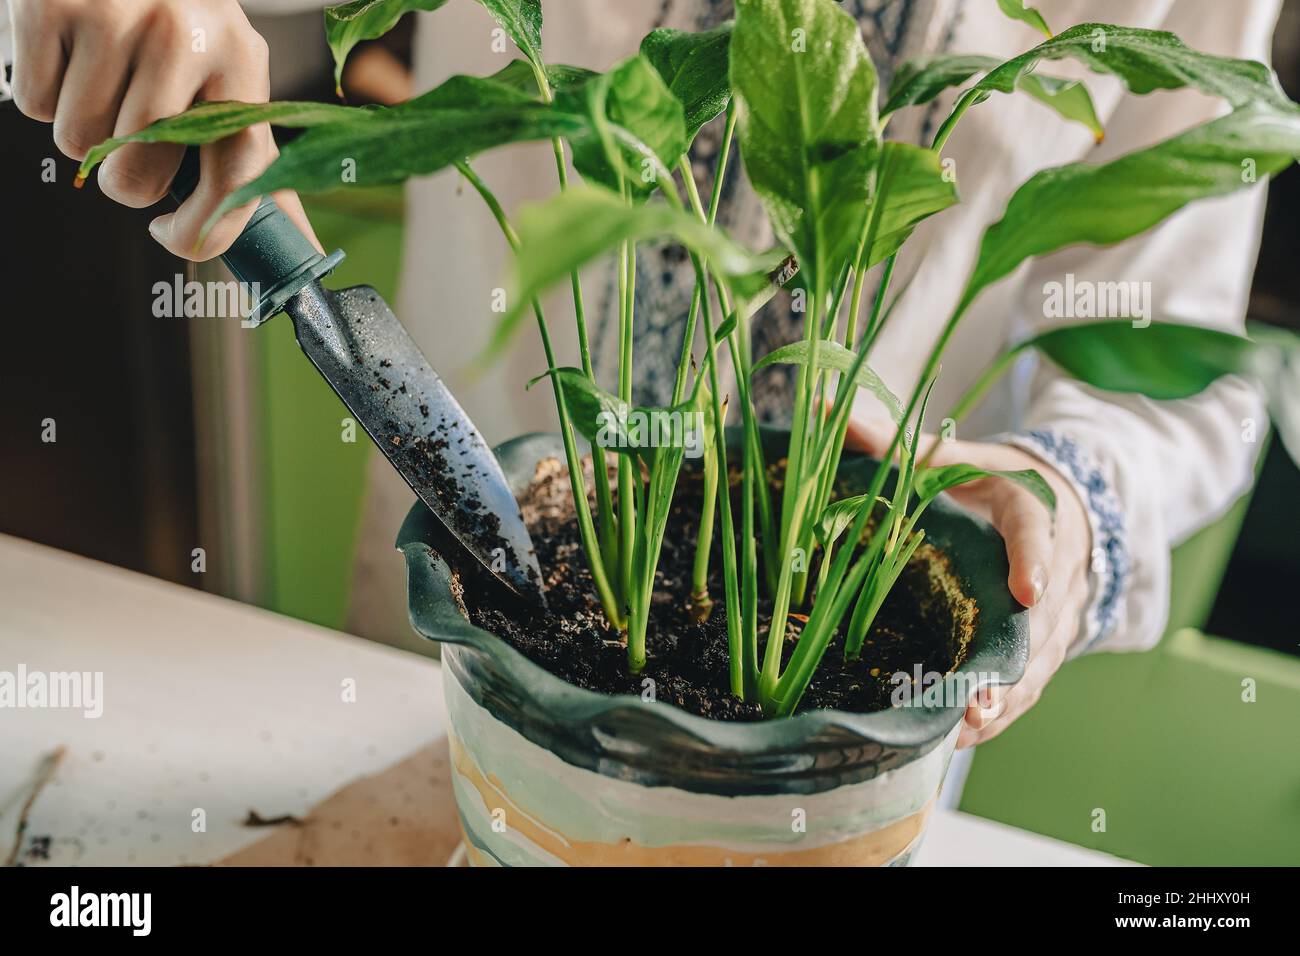 Spring transplant of houseplants into fertilized soil. woman's hands with garden shovel are transplanted into new flower pot tropical plant spathiphyl Stock Photo